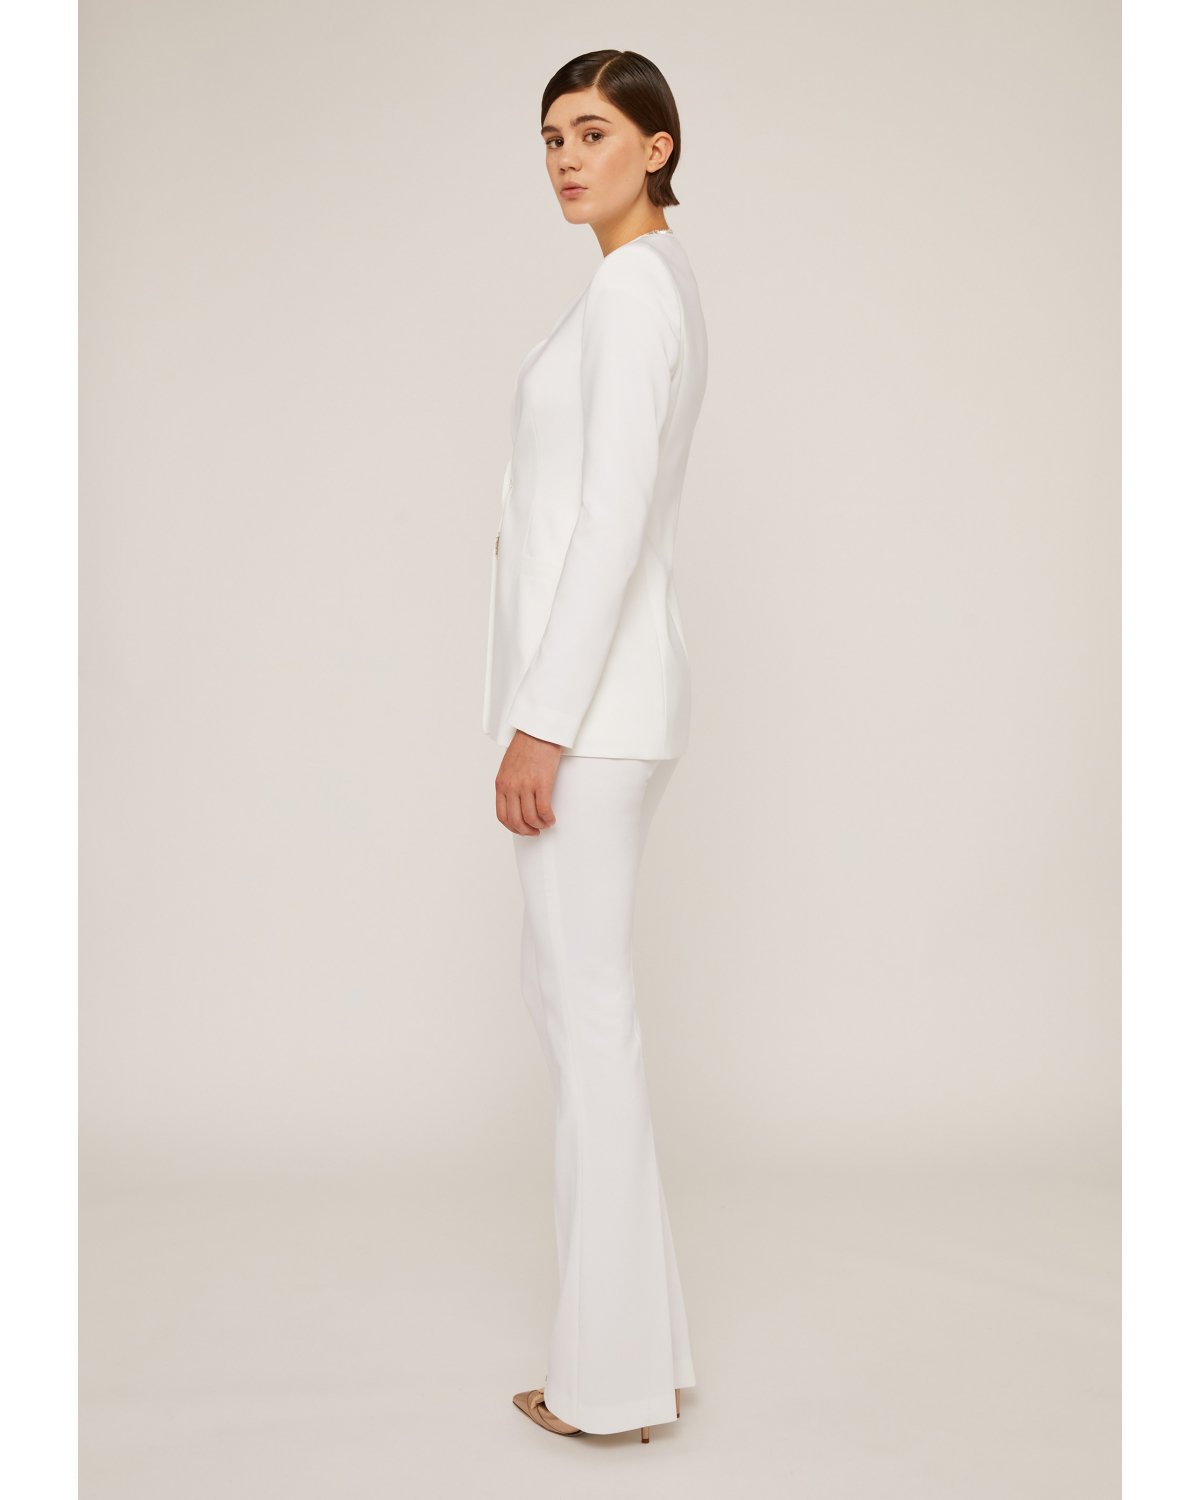 Tailored white pants | Spring Summer 2023 Collection, 73_74, Cruise 2023 Collection, Warm weather wear, Ready to Wear, New Arrivals, Spring suits, Mother's Day | Genny